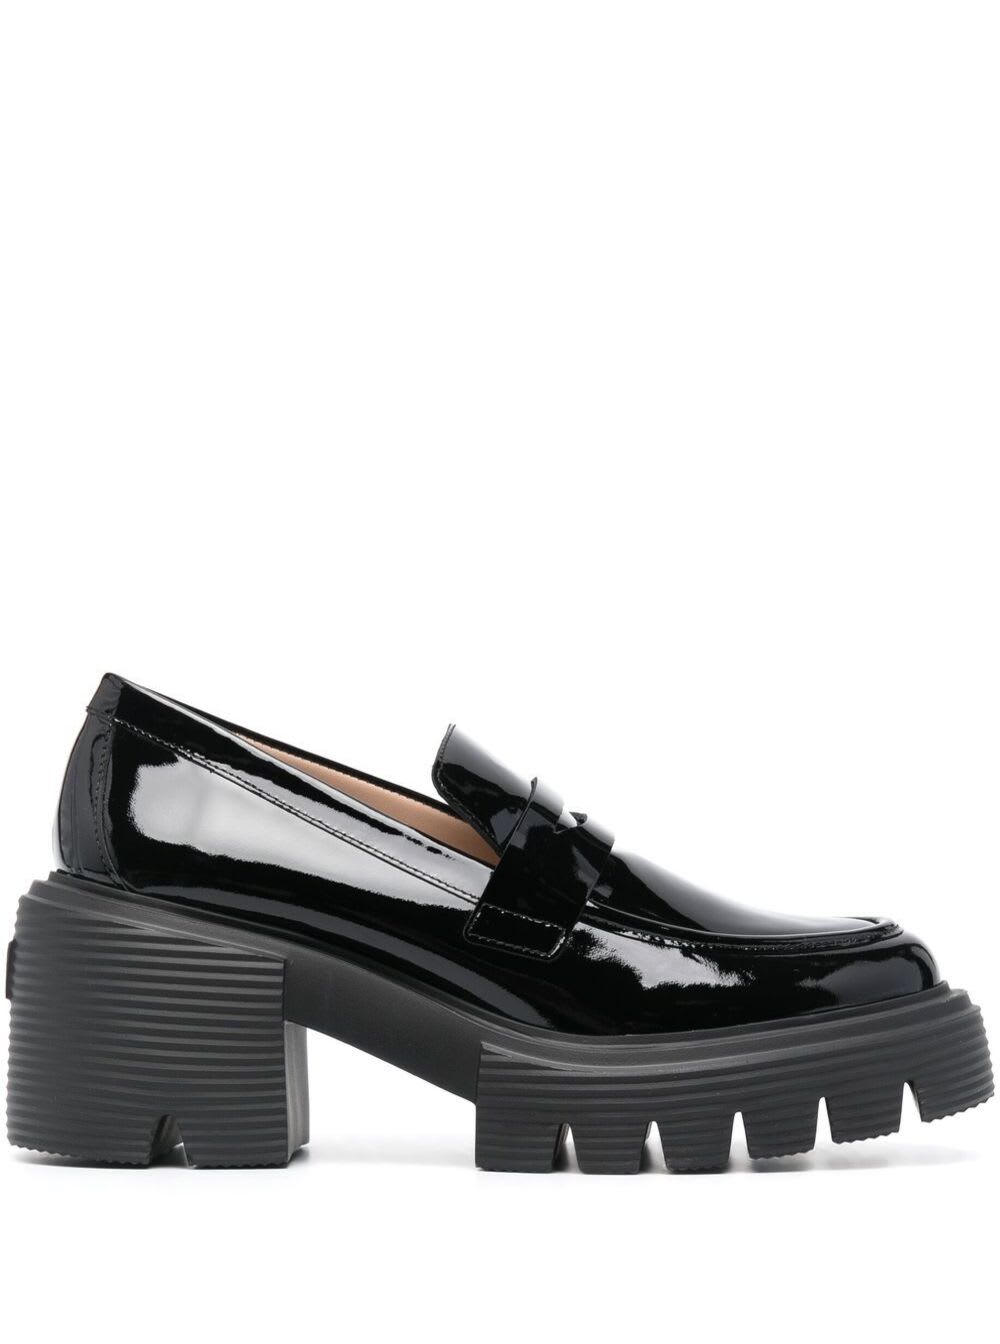 STUART WEITZMAN SOHO BLACK LOAFERS WITH CHUNKY SOLE IN PATENT LEATHER WOMAN